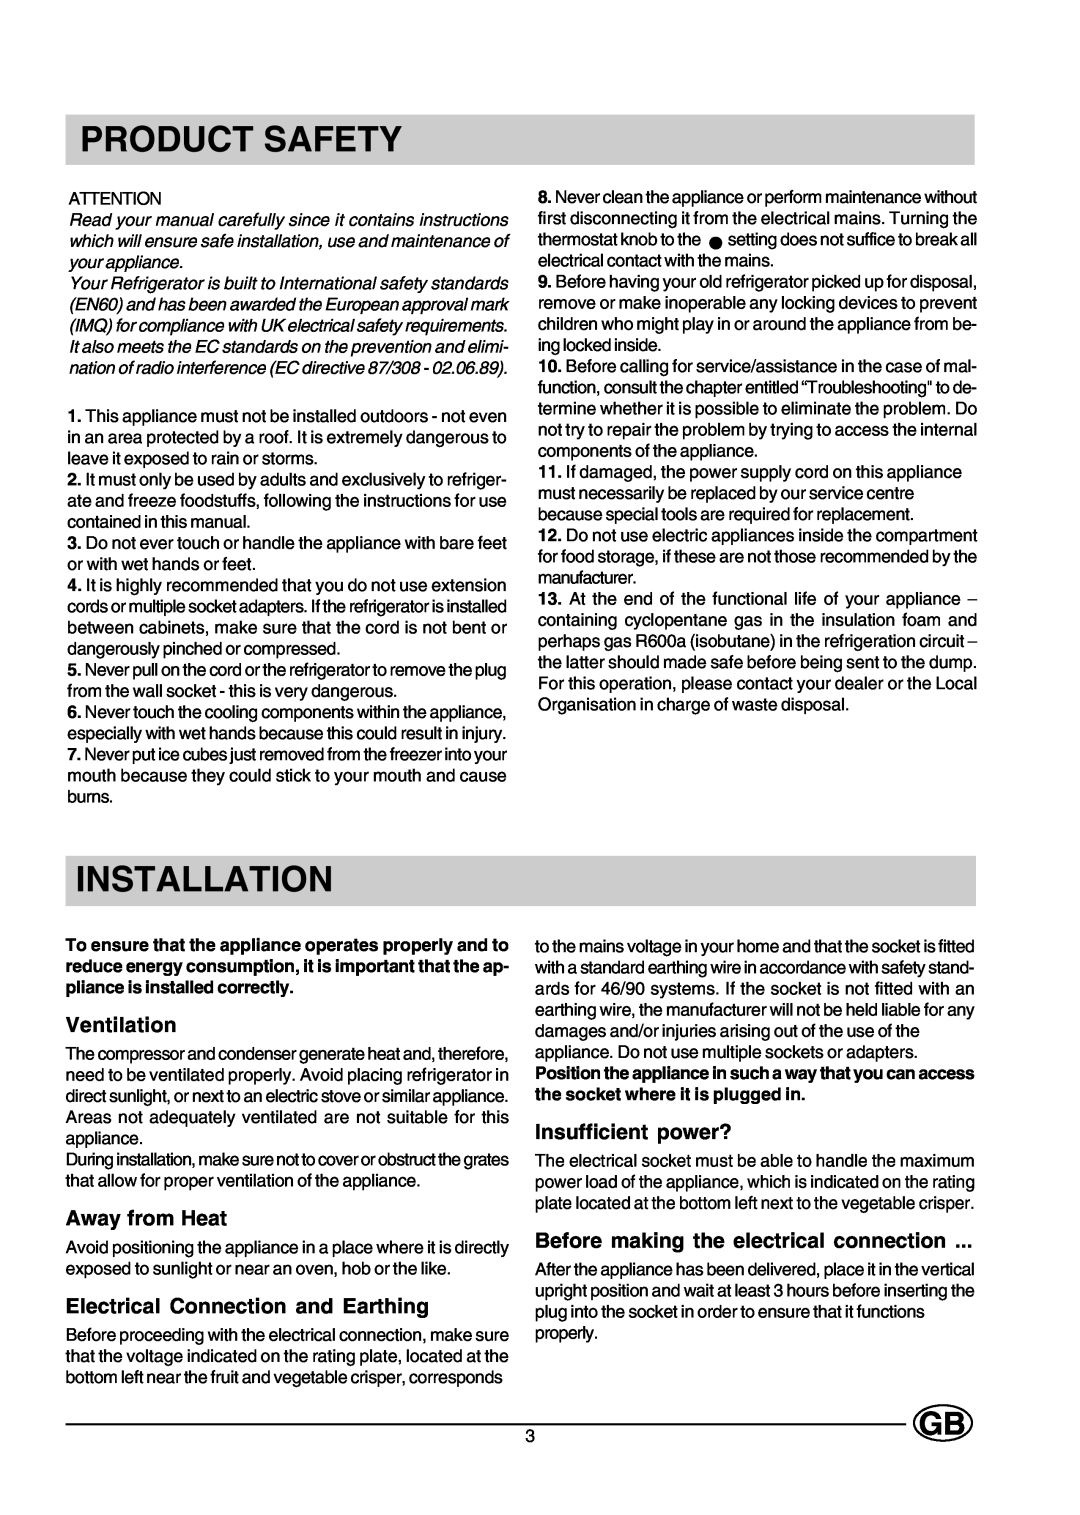 Creda CUL16G manual Product Safety, Installation, Ventilation, Away from Heat, Electrical Connection and Earthing 